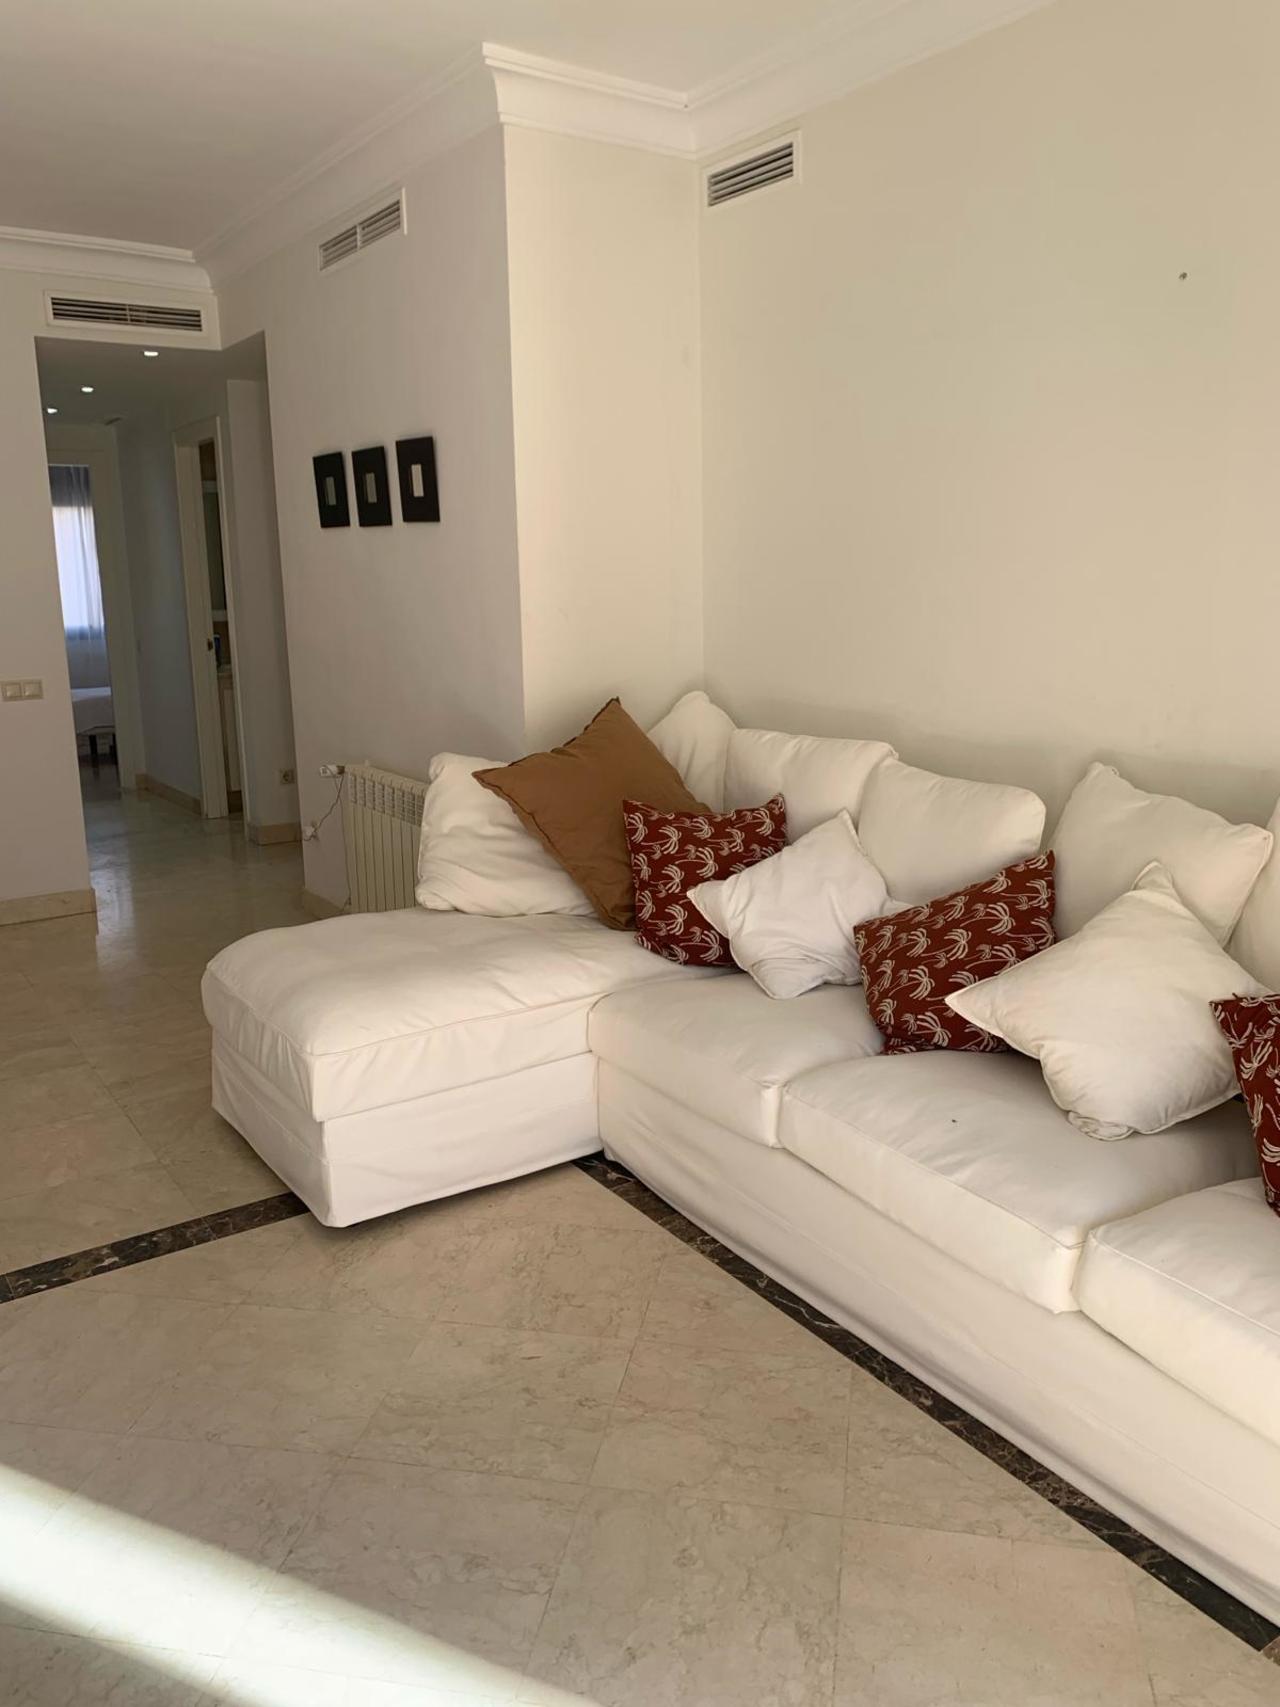 Apartment for sale in San Pedro del Pinatar and San Javier 8